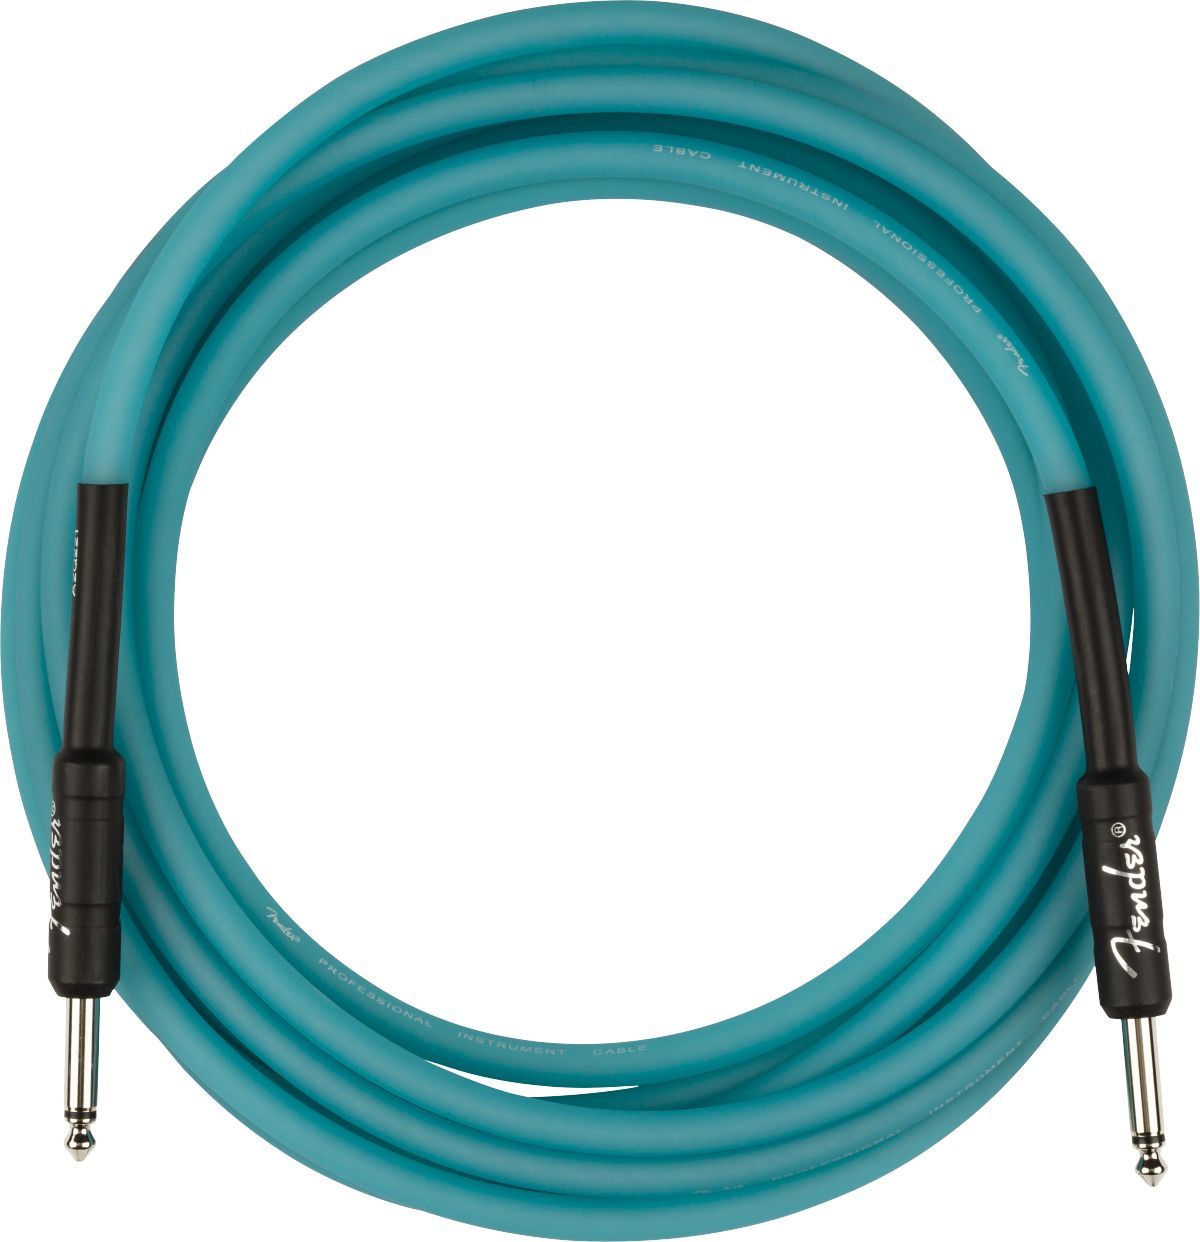 Fender Professional Series Glow in the Dark Cables Blue